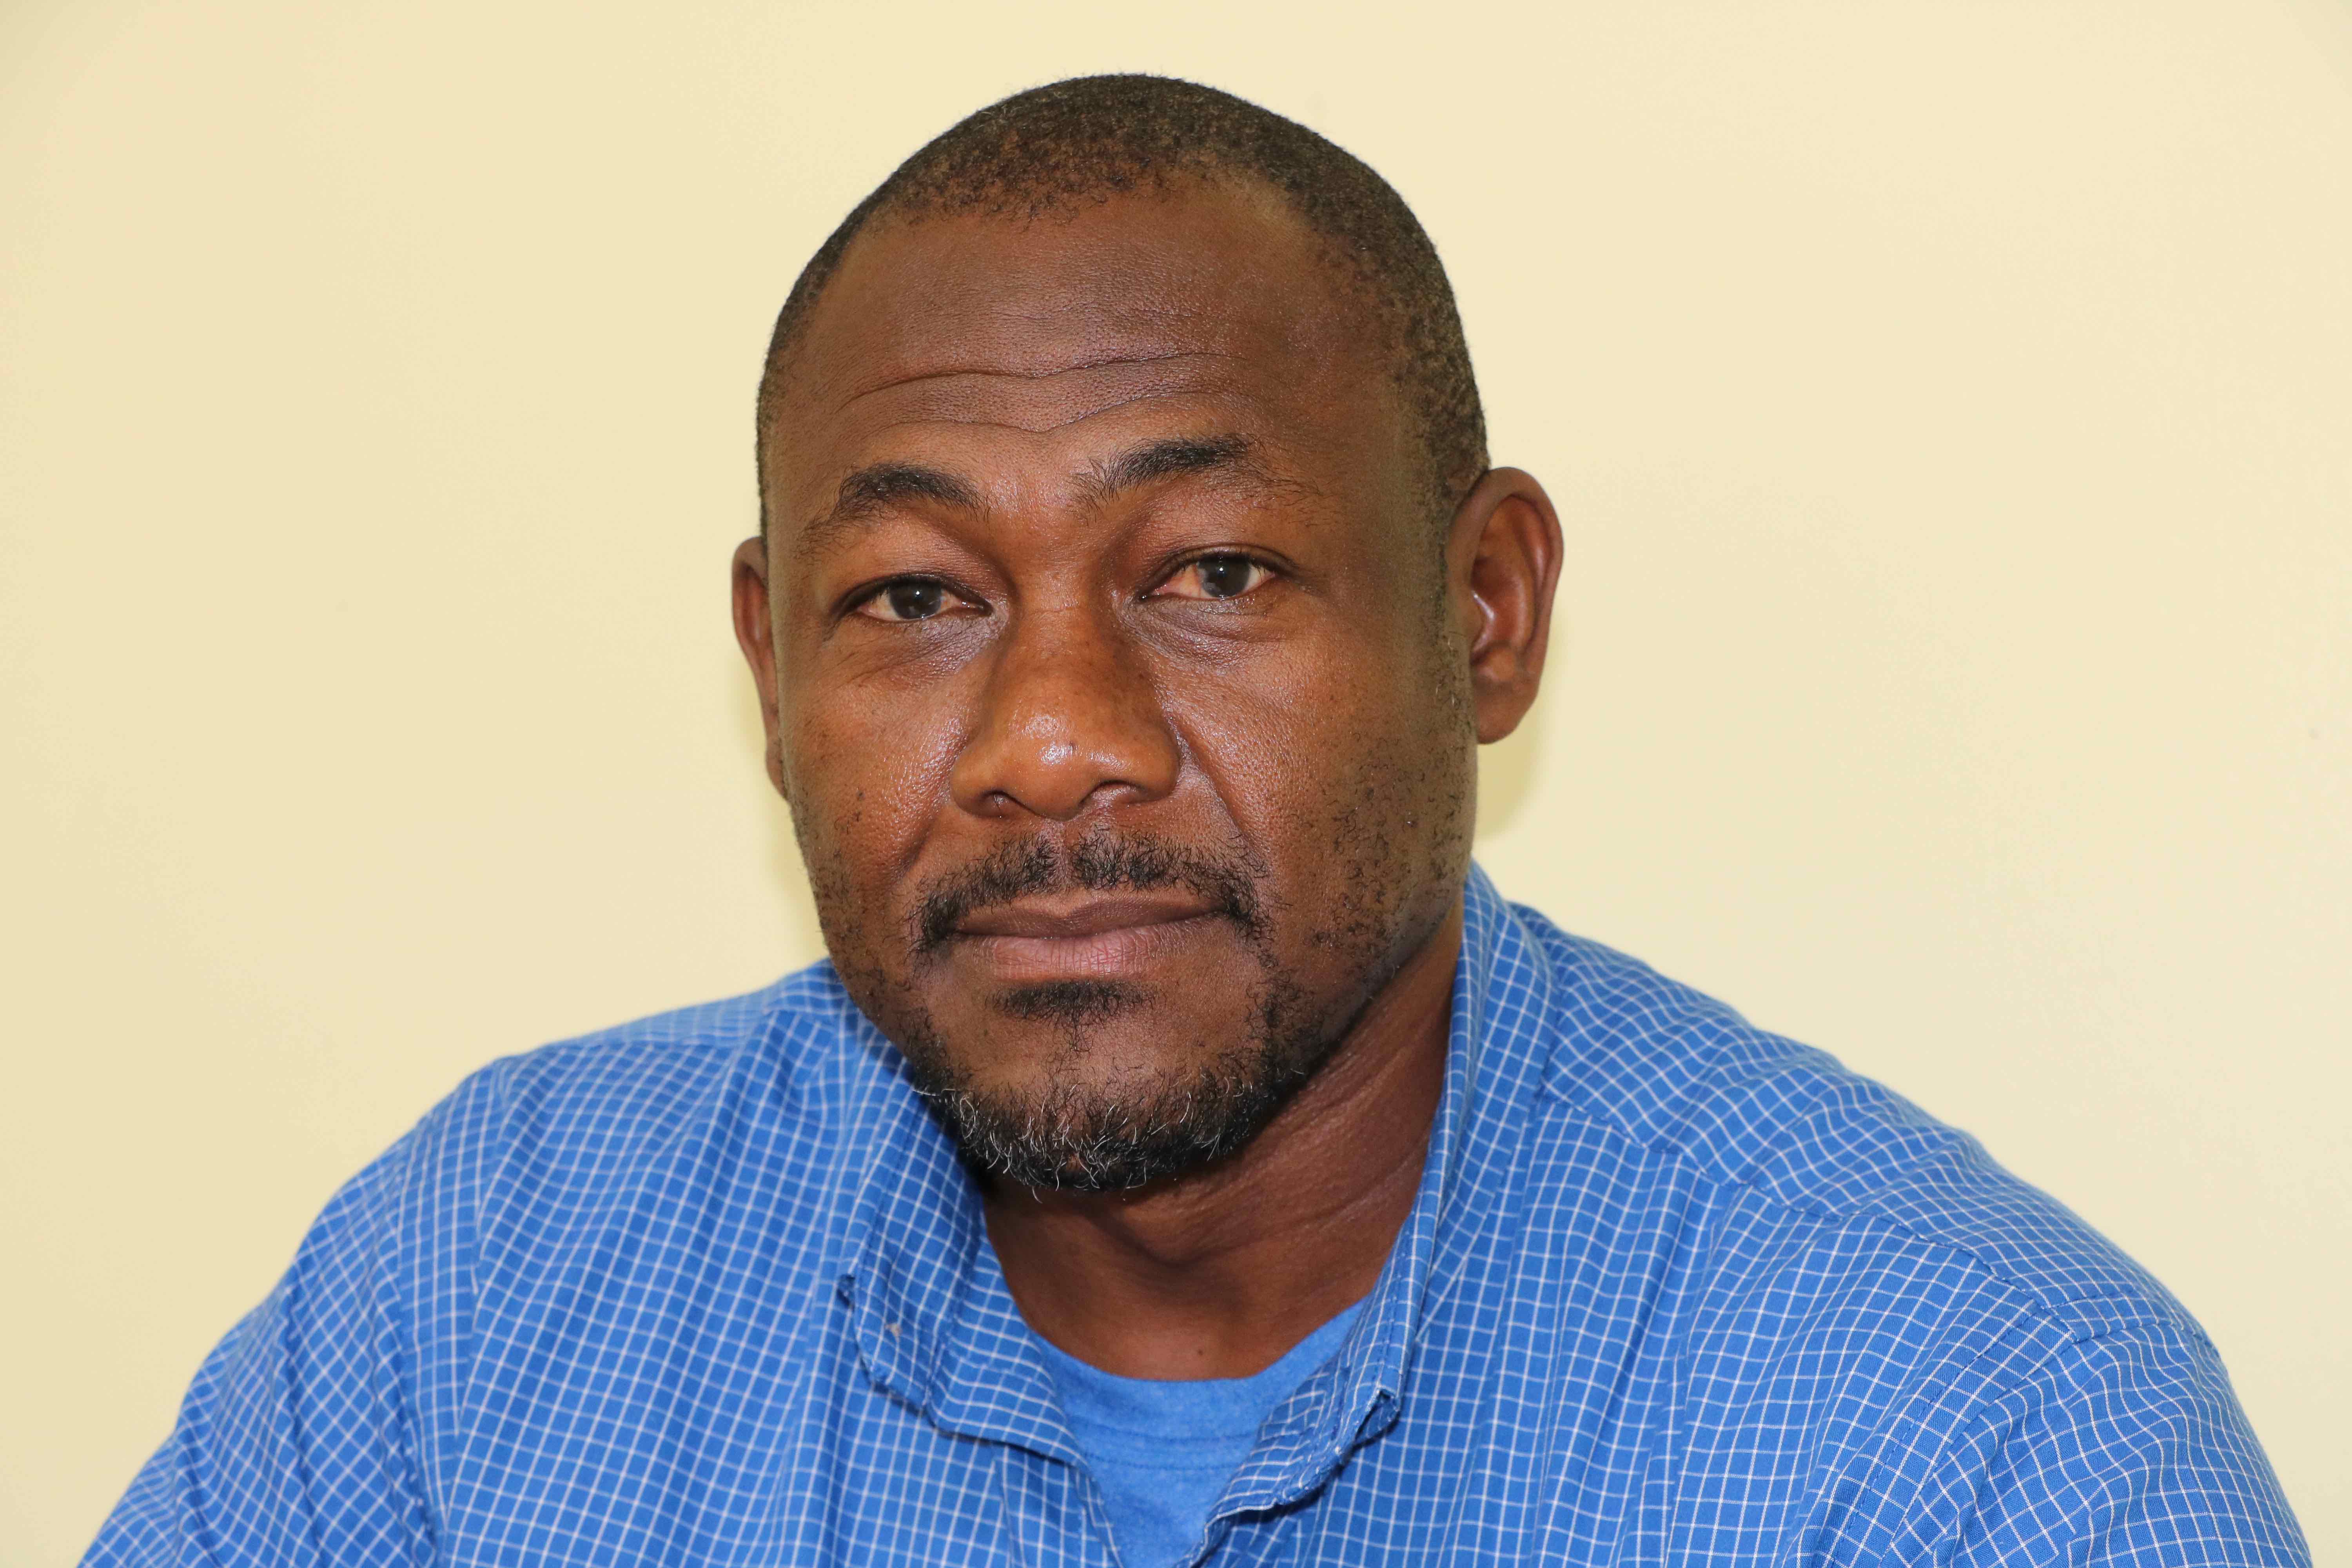 Mr. Brian Dore, Director of the Nevis Disaster Management Department in the Nevis Island Administration